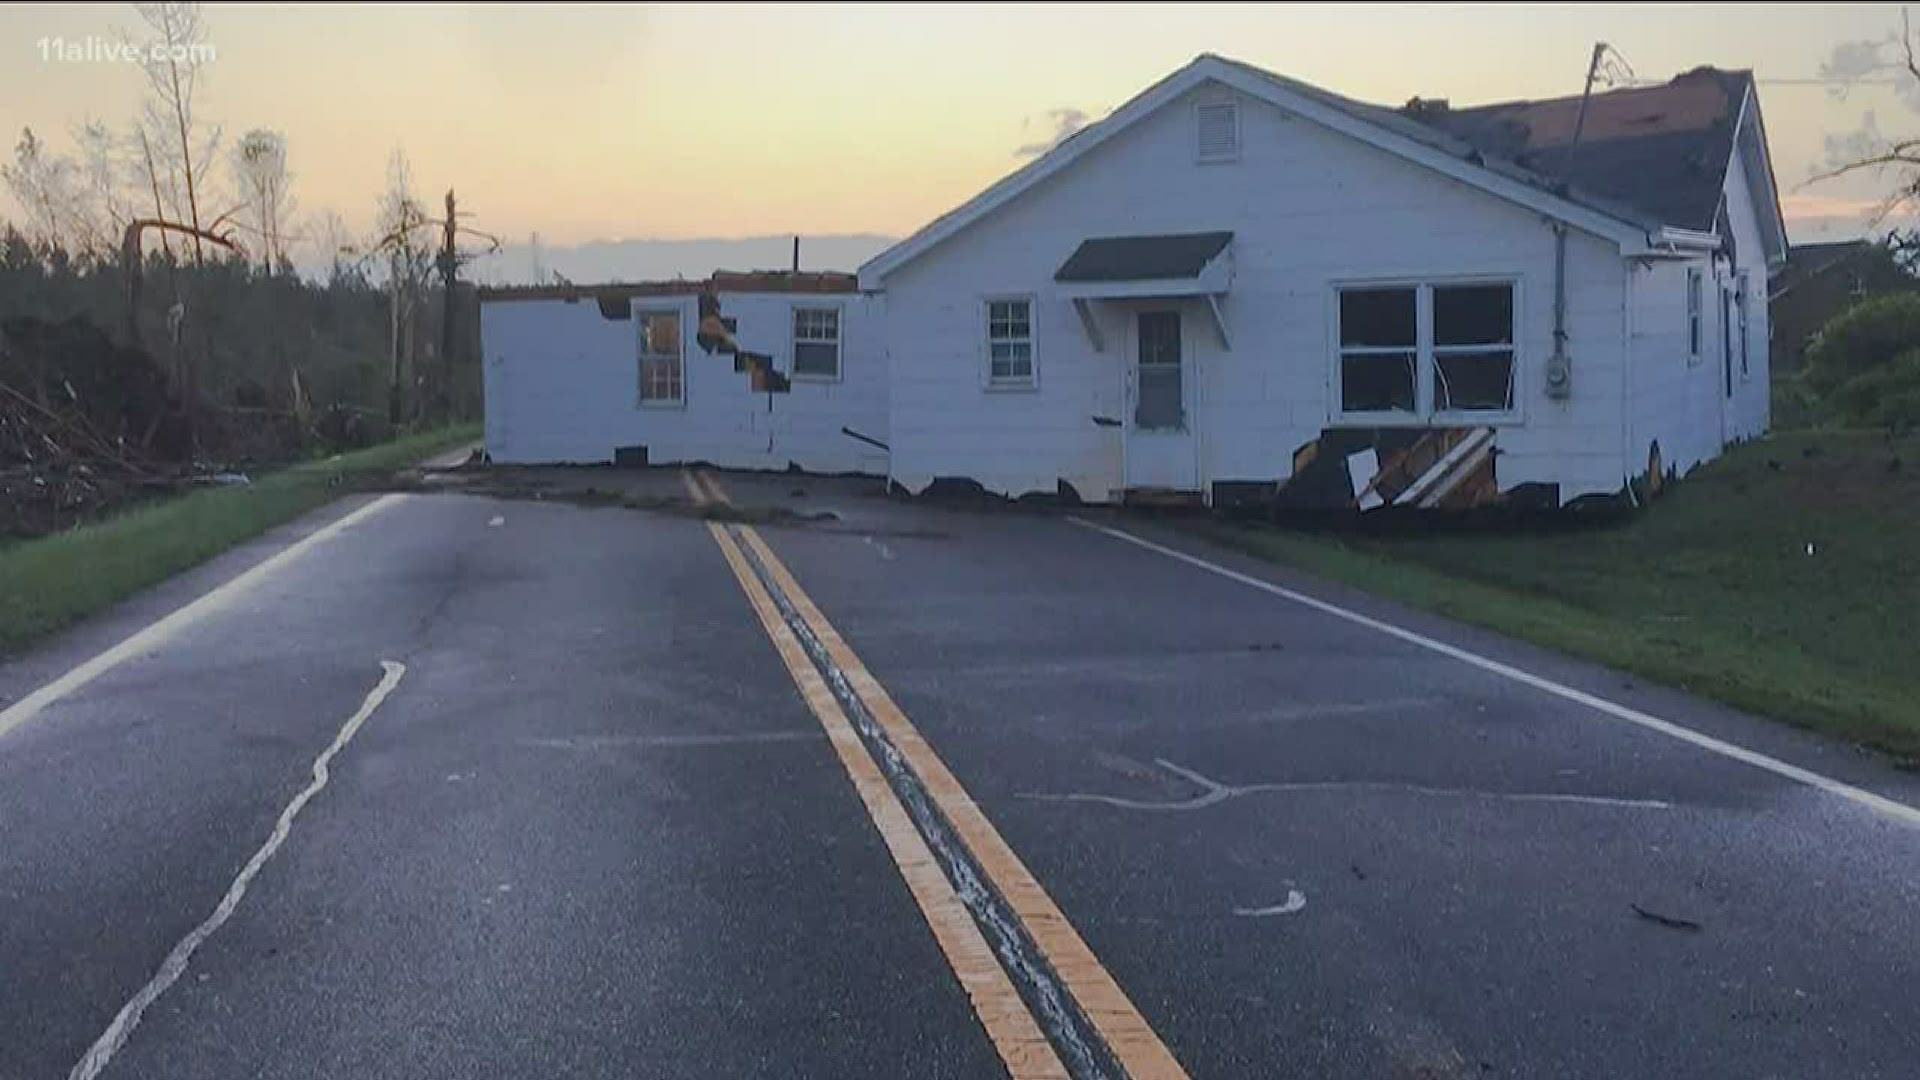 Preliminary data suggests the tornado in Upson County was more than 1,000 yards wide and traveled 10 miles.